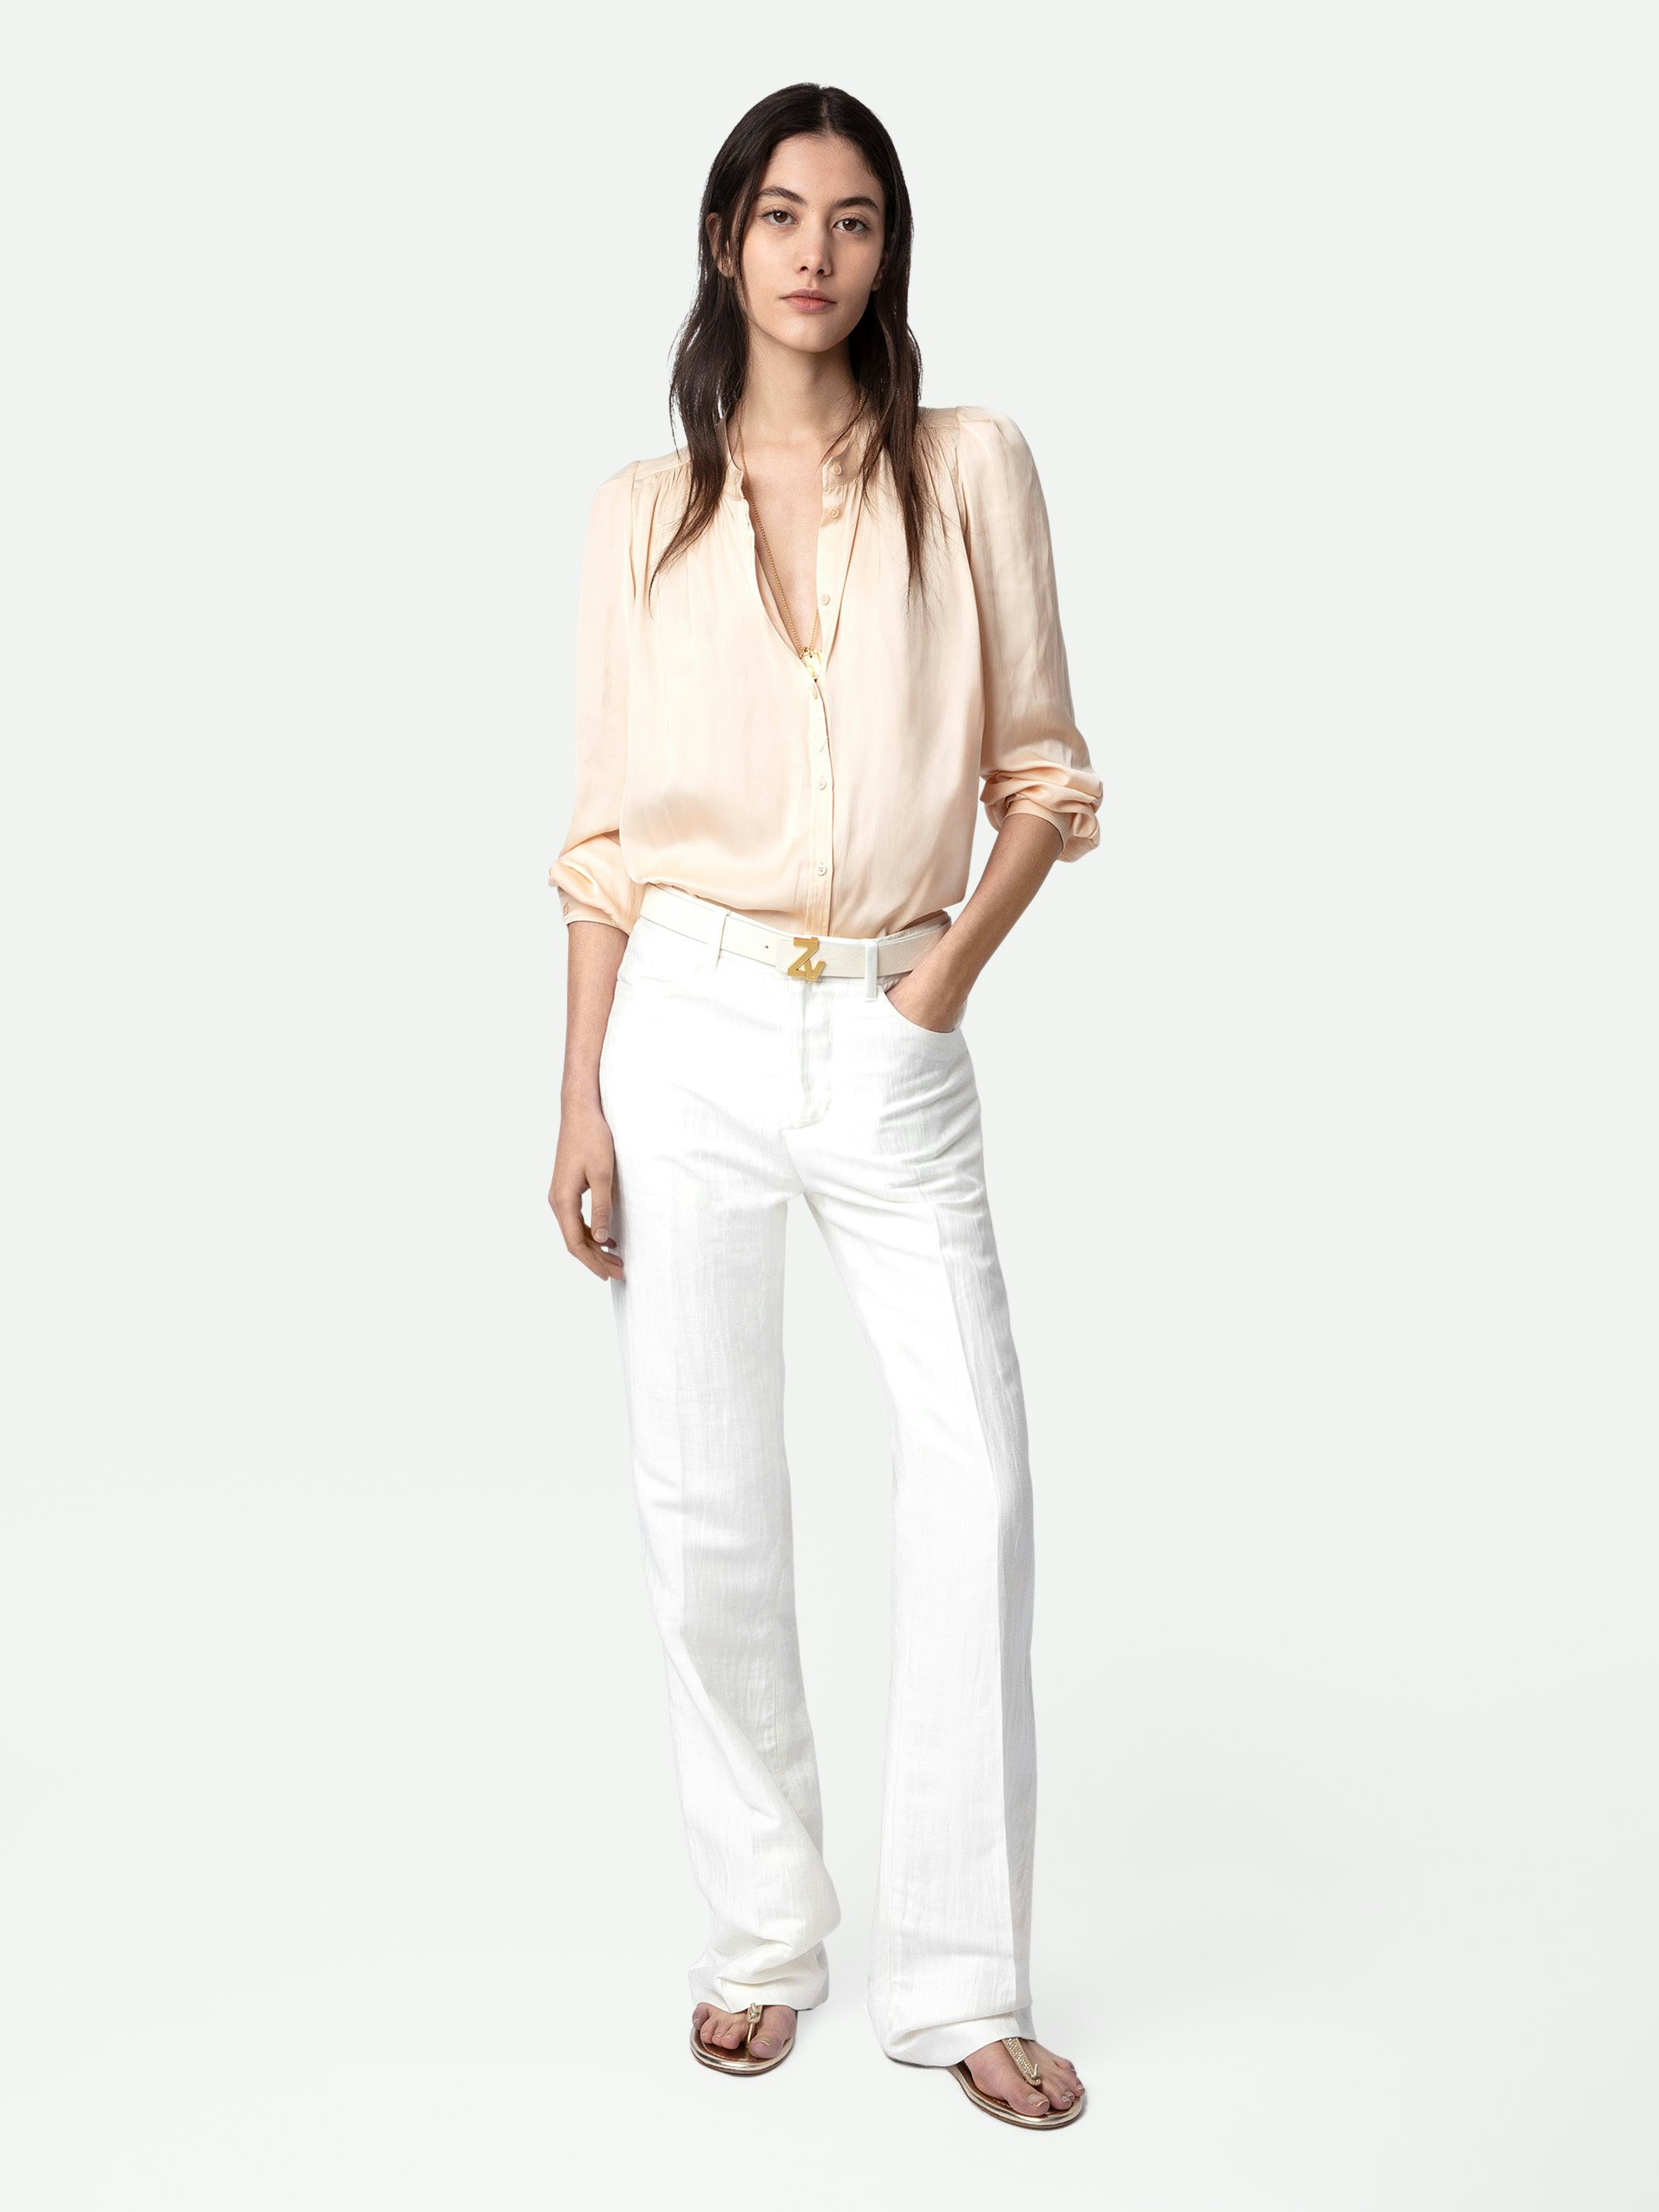 Tchin Satin Blouse - Buttoned pale pink satin blouse with long sleeves and gathered shoulders.